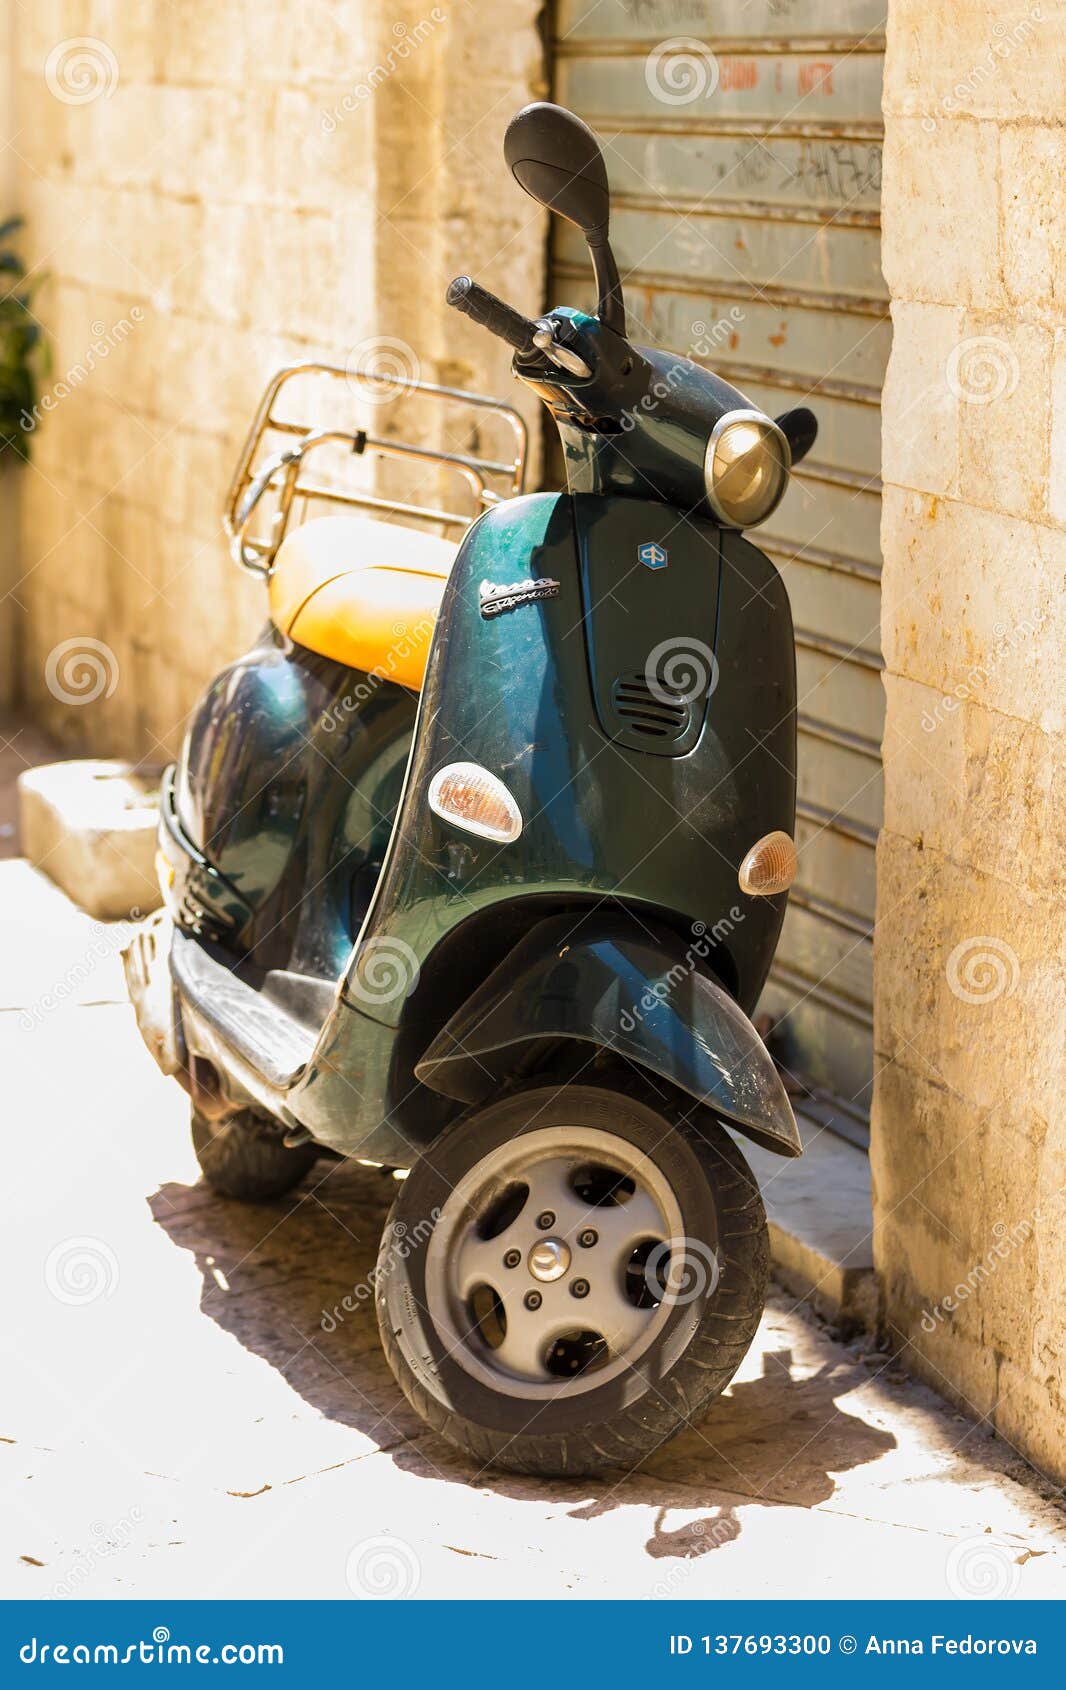 Santo Ganar Lago taupo BARI, ITALY - JULY 11, 2018, Vintage Scooter Vespa Stands in an Alley  Editorial Image - Image of green, motor: 137693300